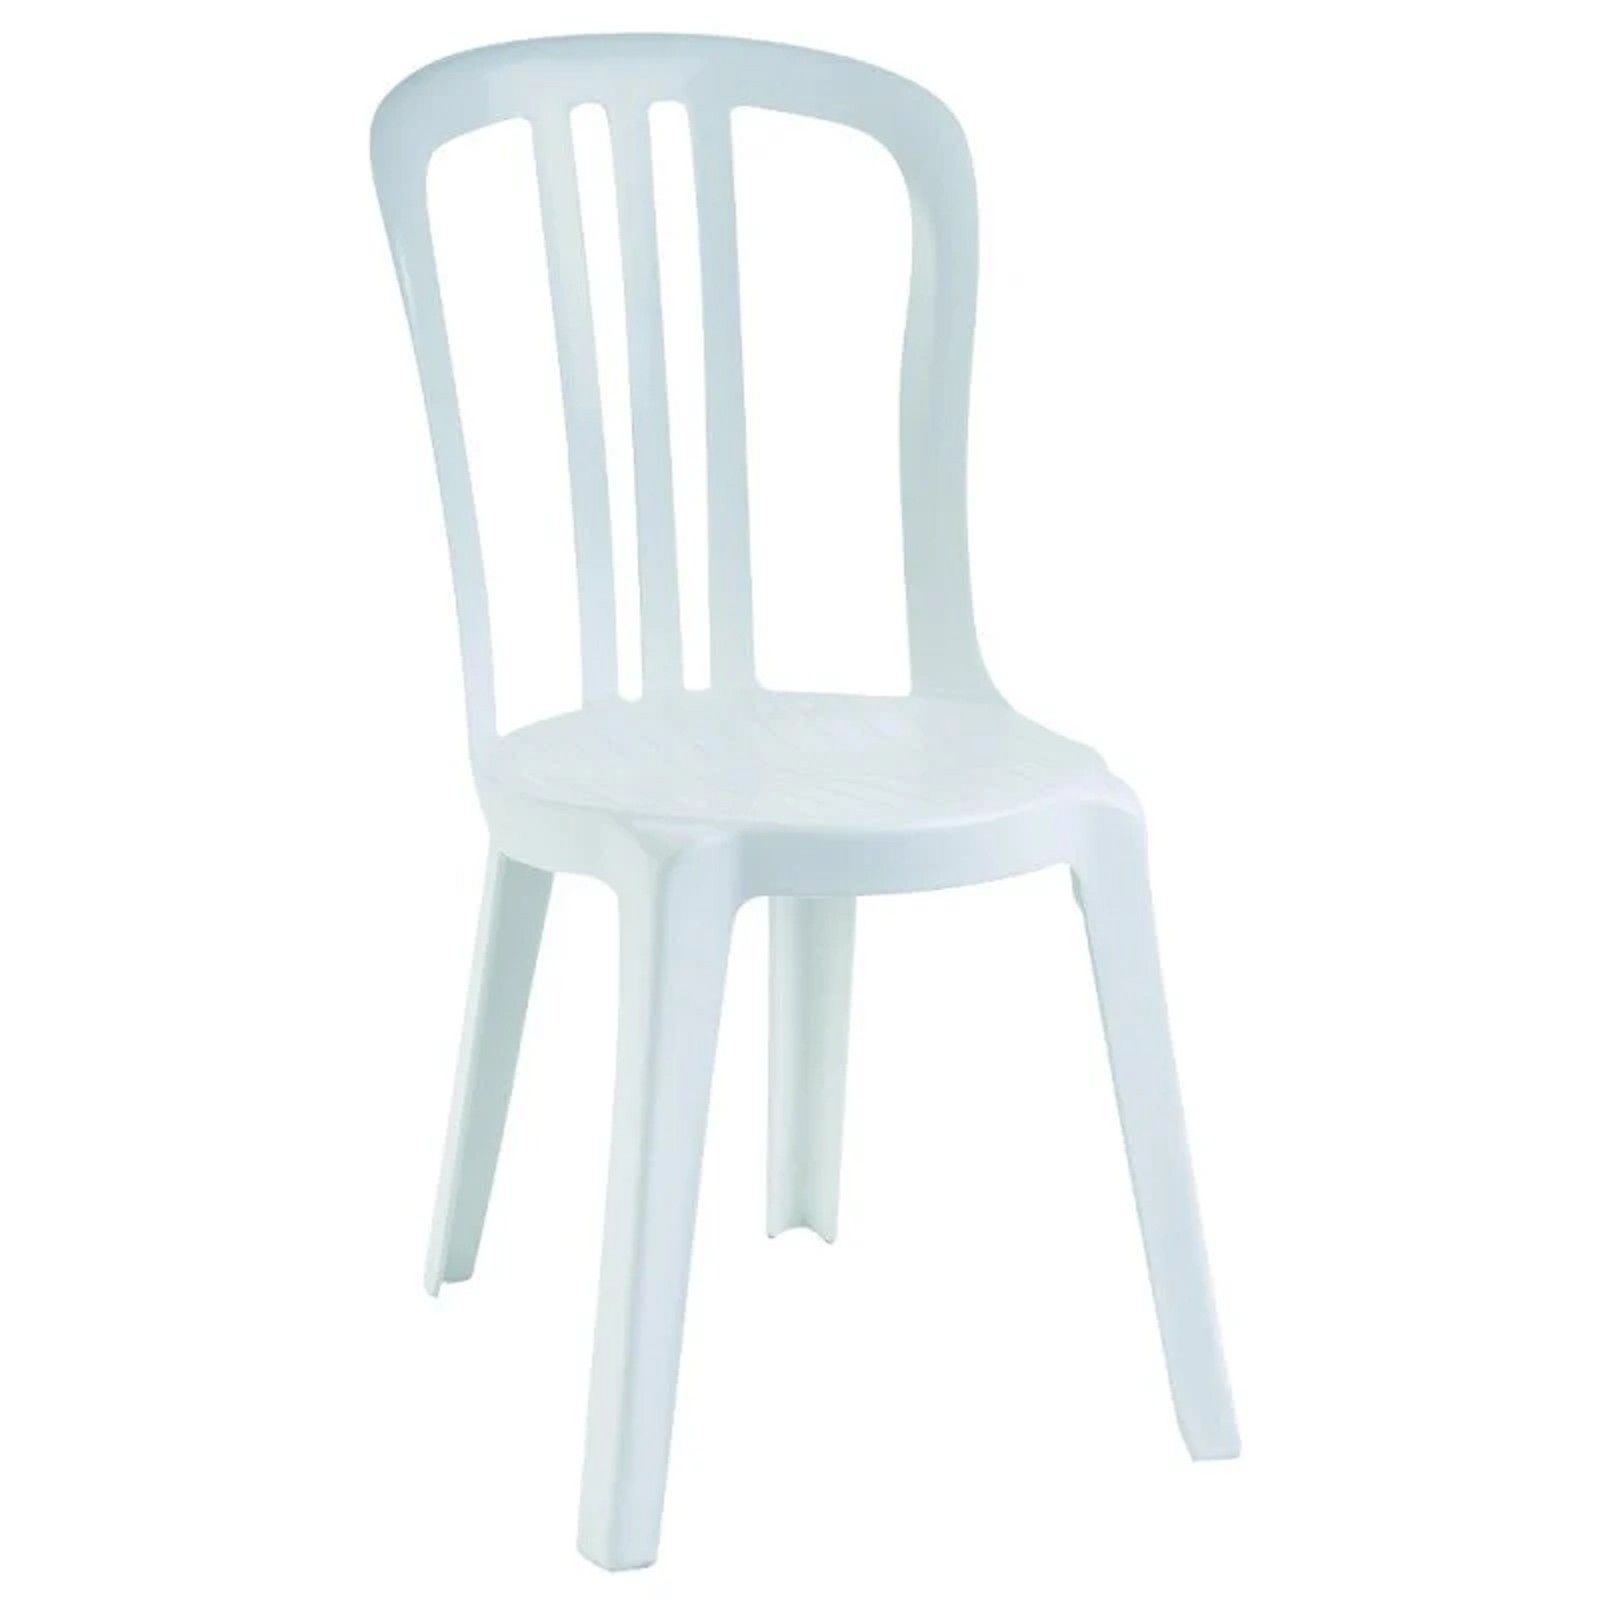 White plastic stackable outdoor chair rental